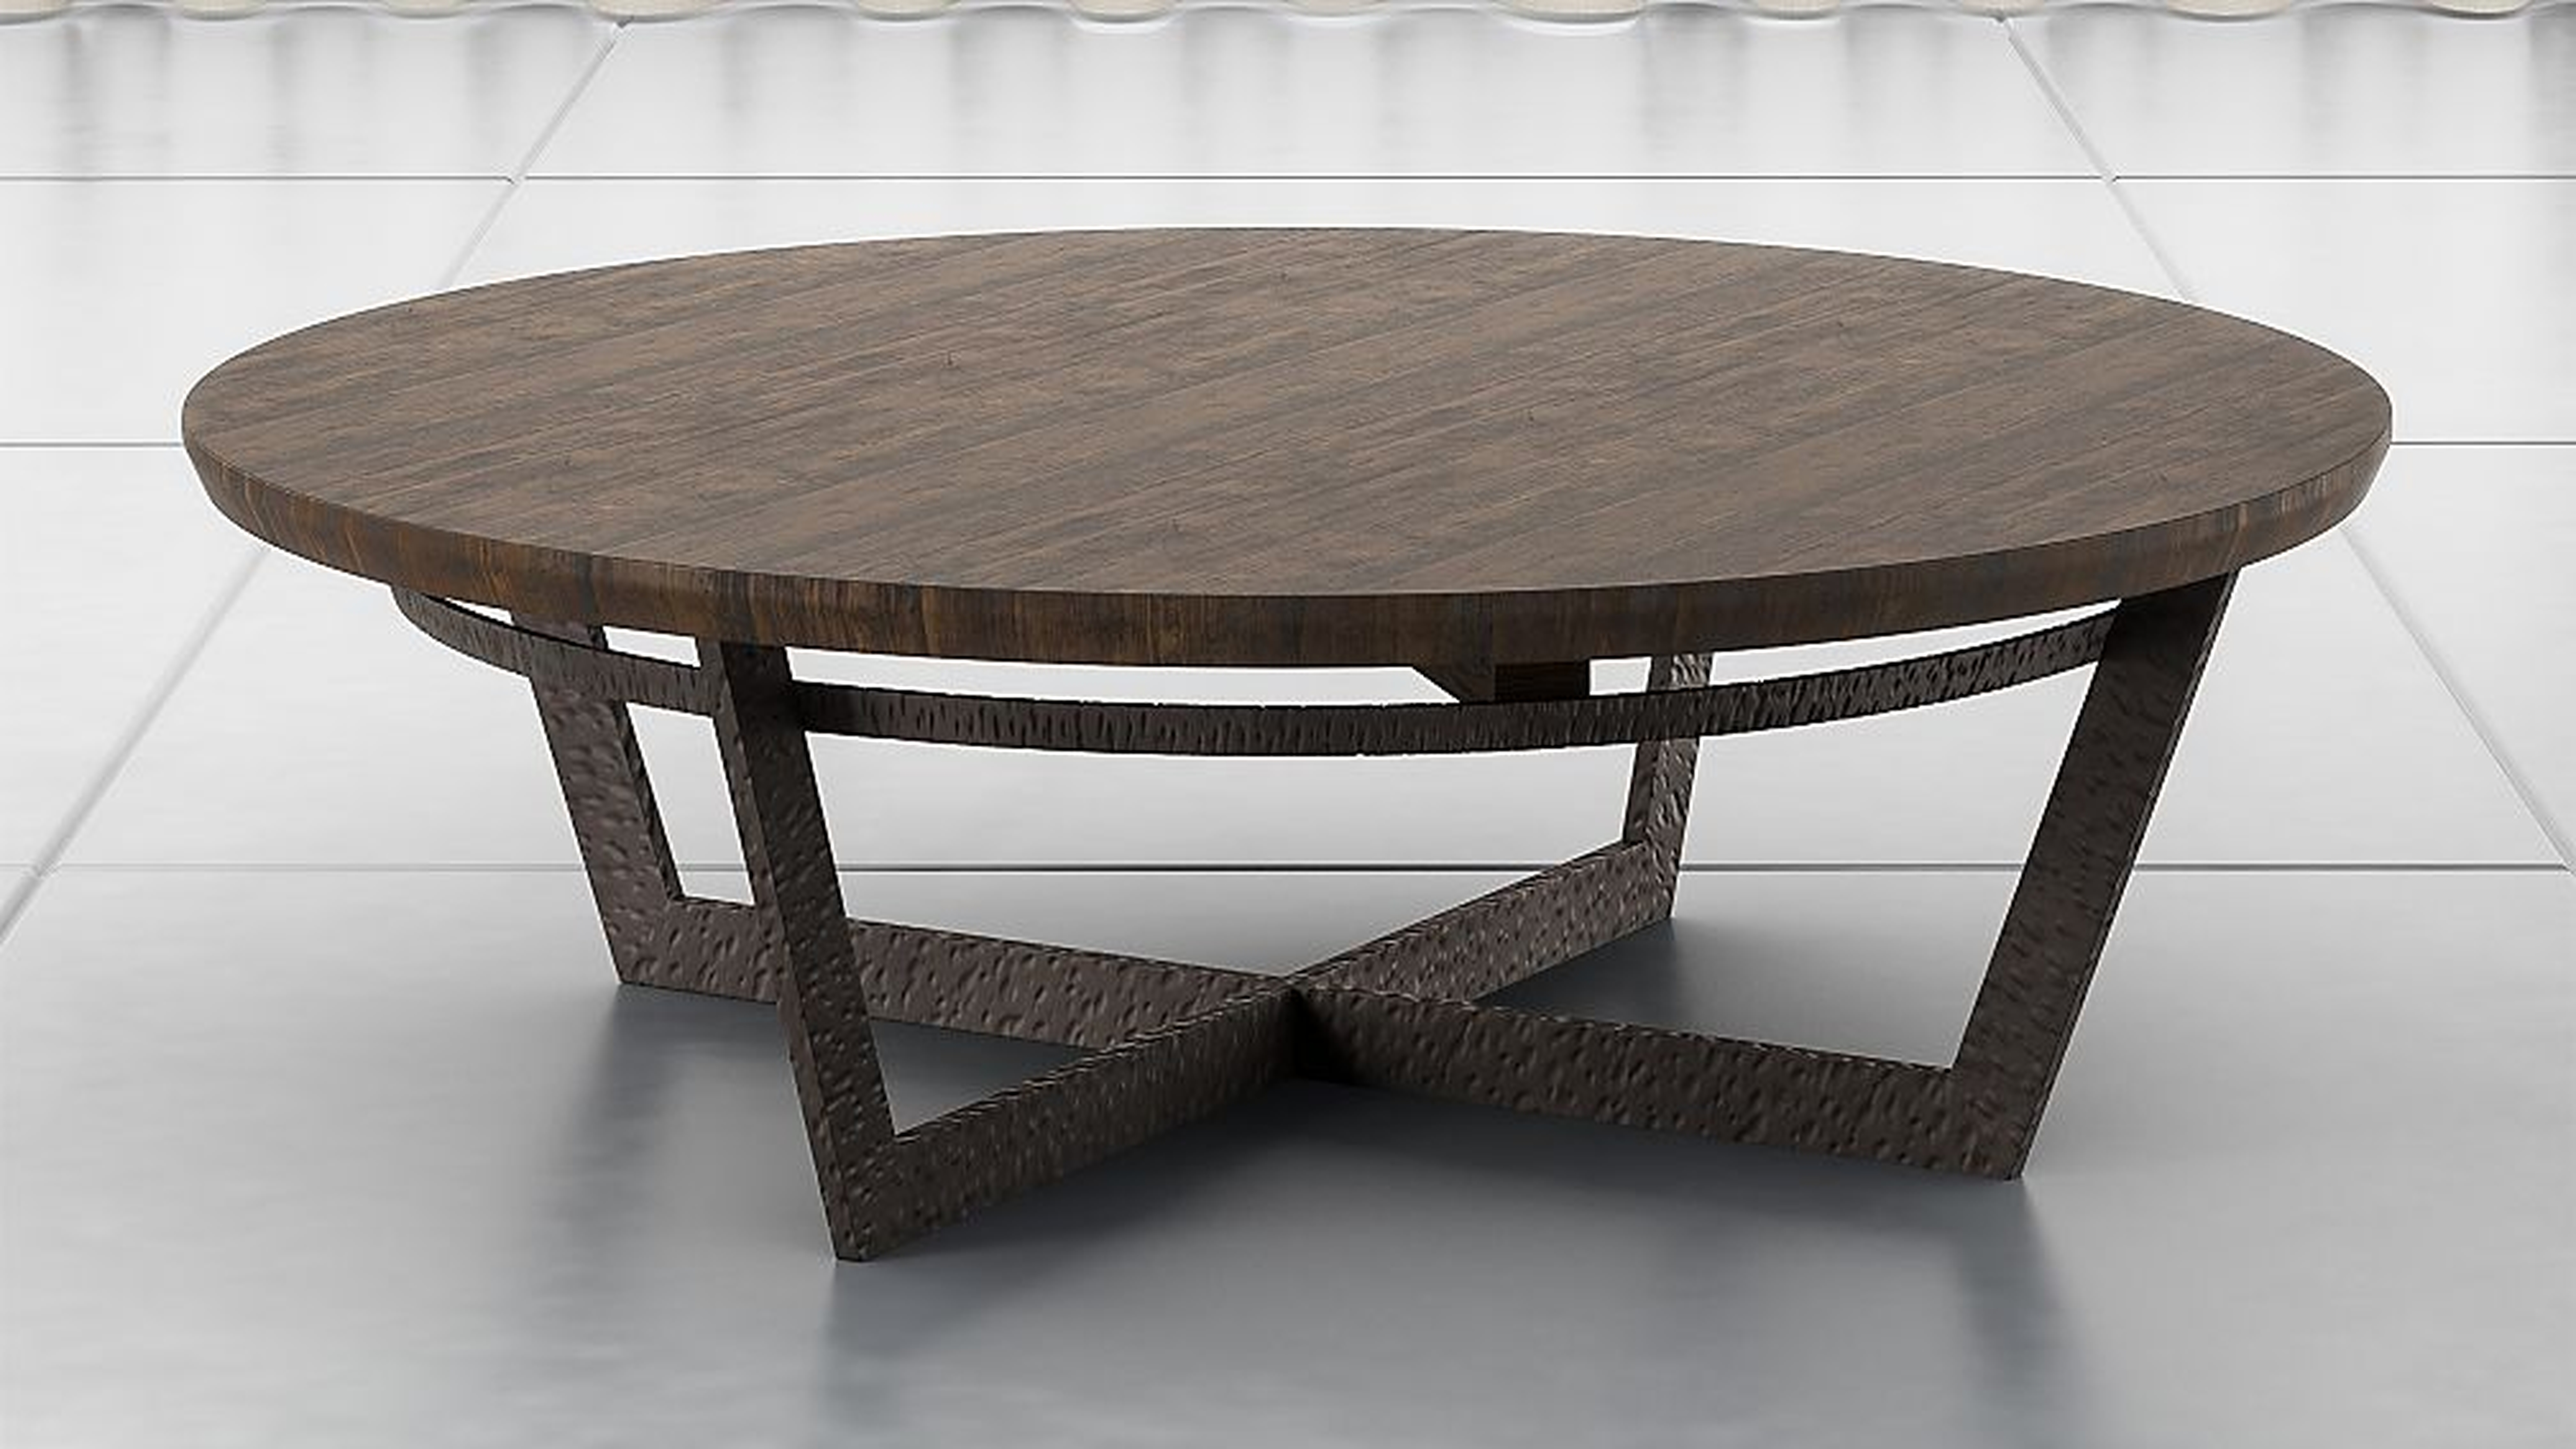 Verdad Wood Top Coffee Table - Crate and Barrel